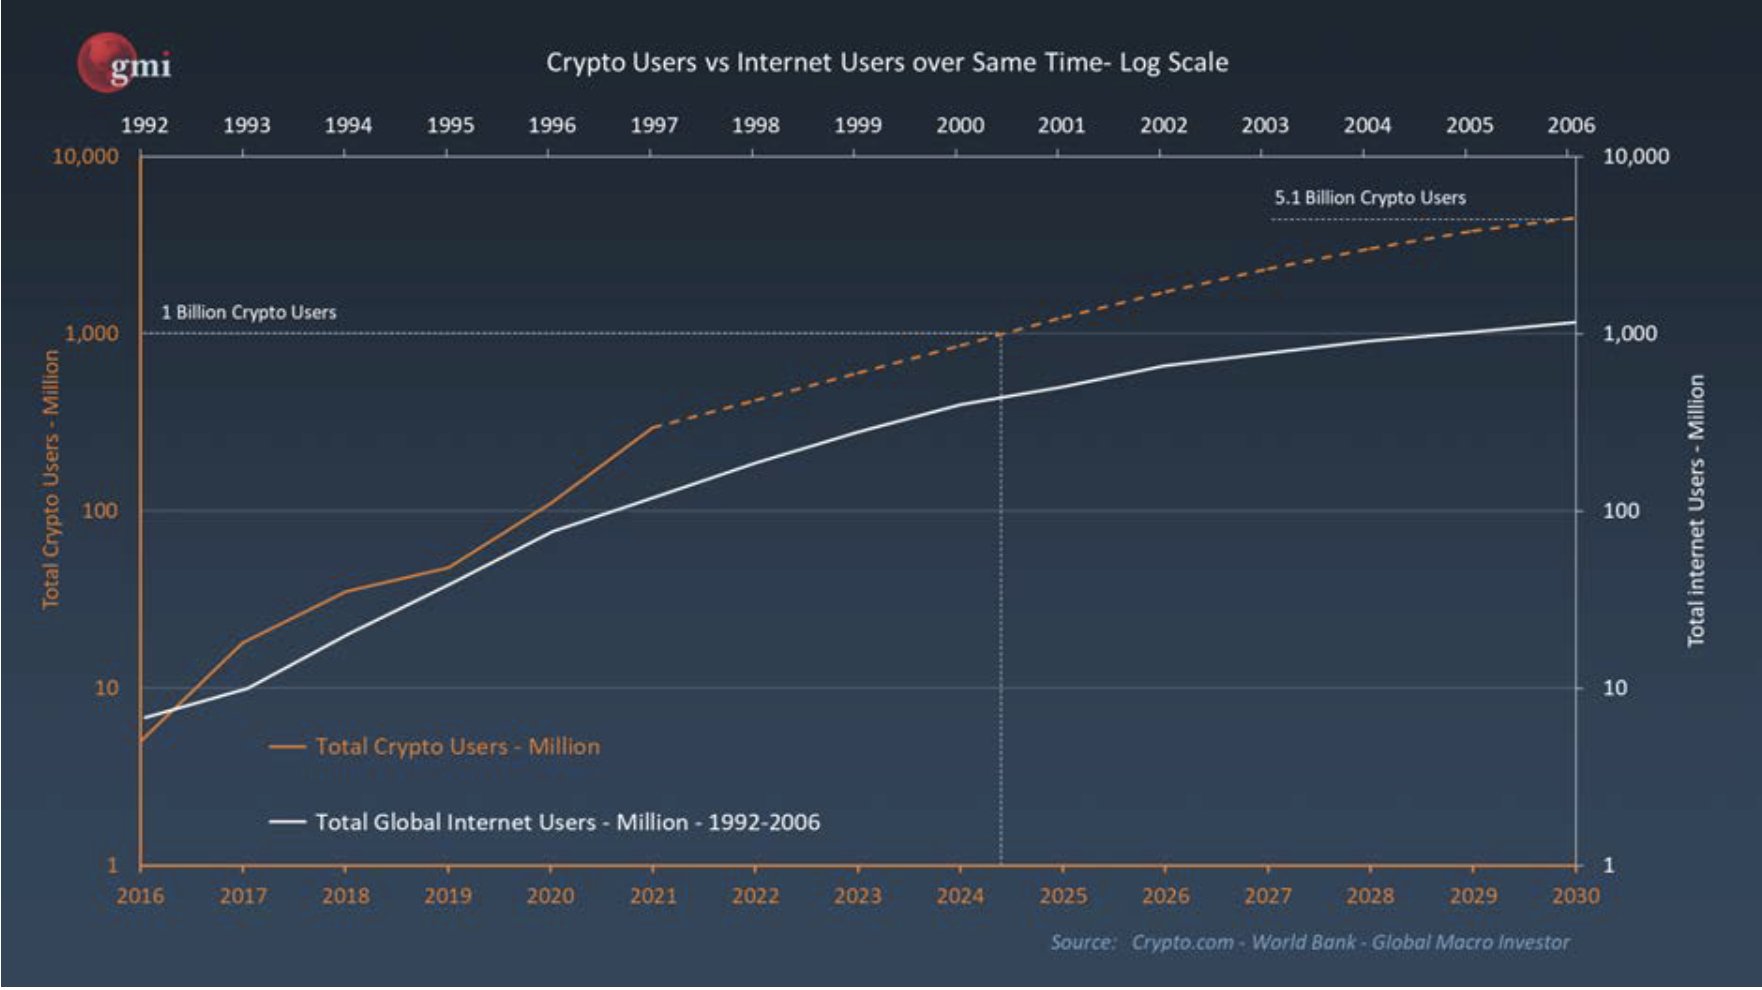 Chart showing the technology adoption curve for cryptocurrencies and the internet 